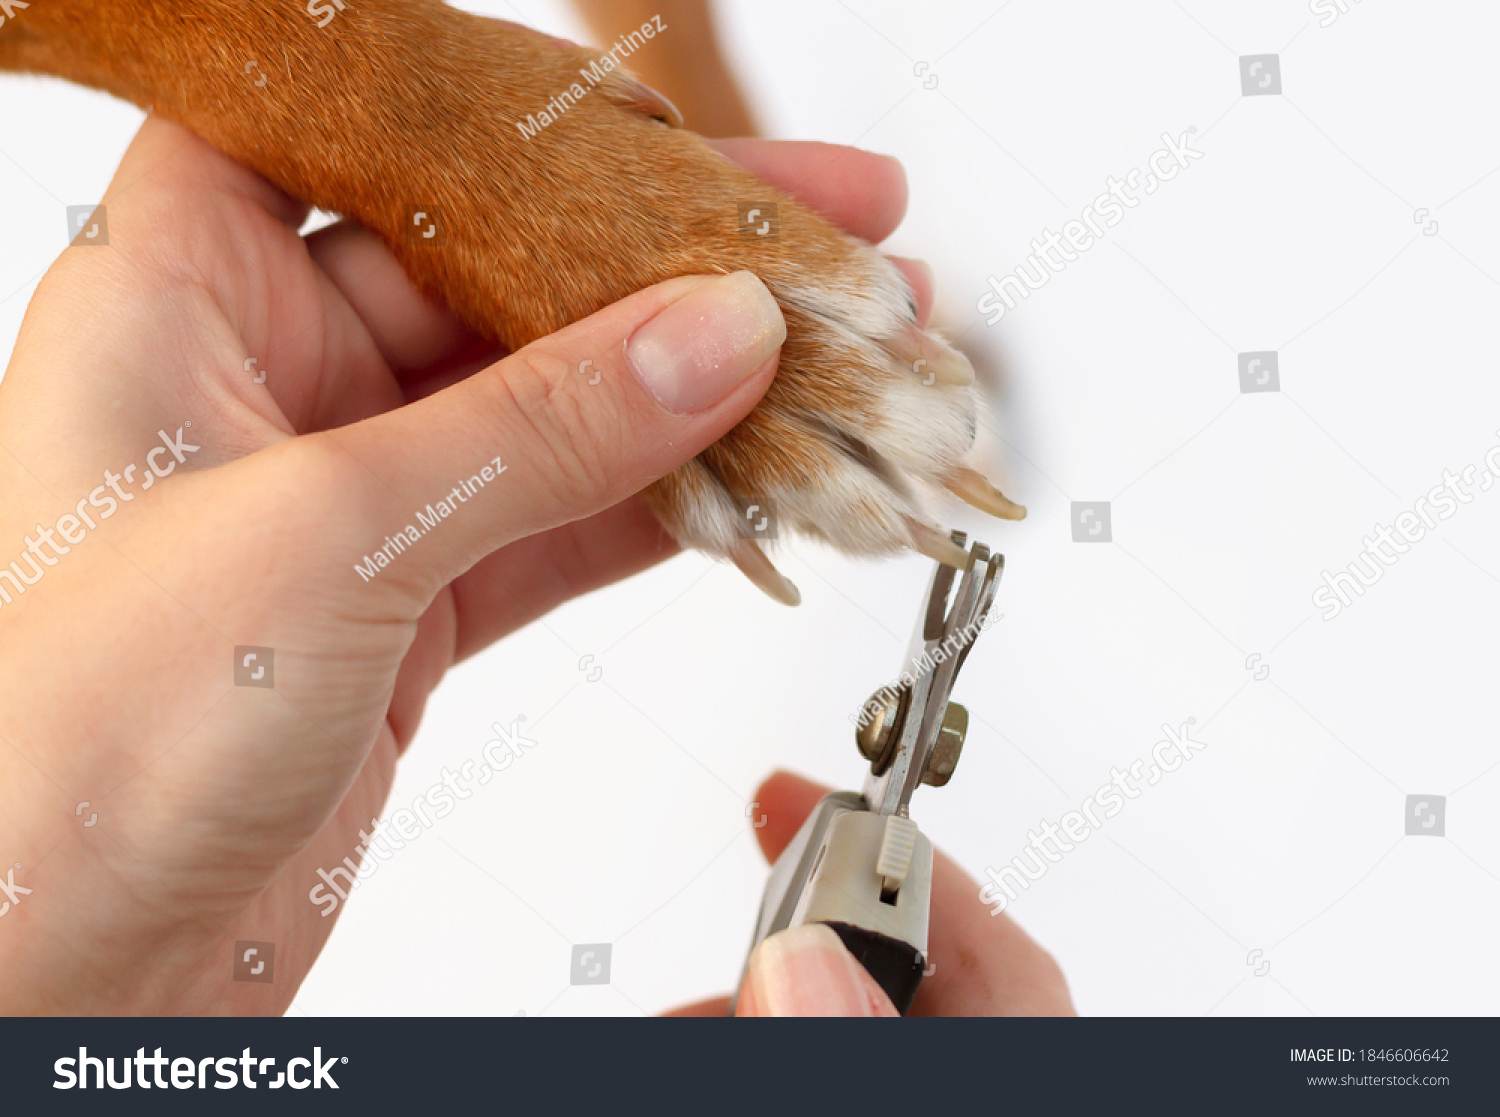 Сlose up of trimming the claws of a dog. the woman's hands are pruning the claws.the clippers. #1846606642